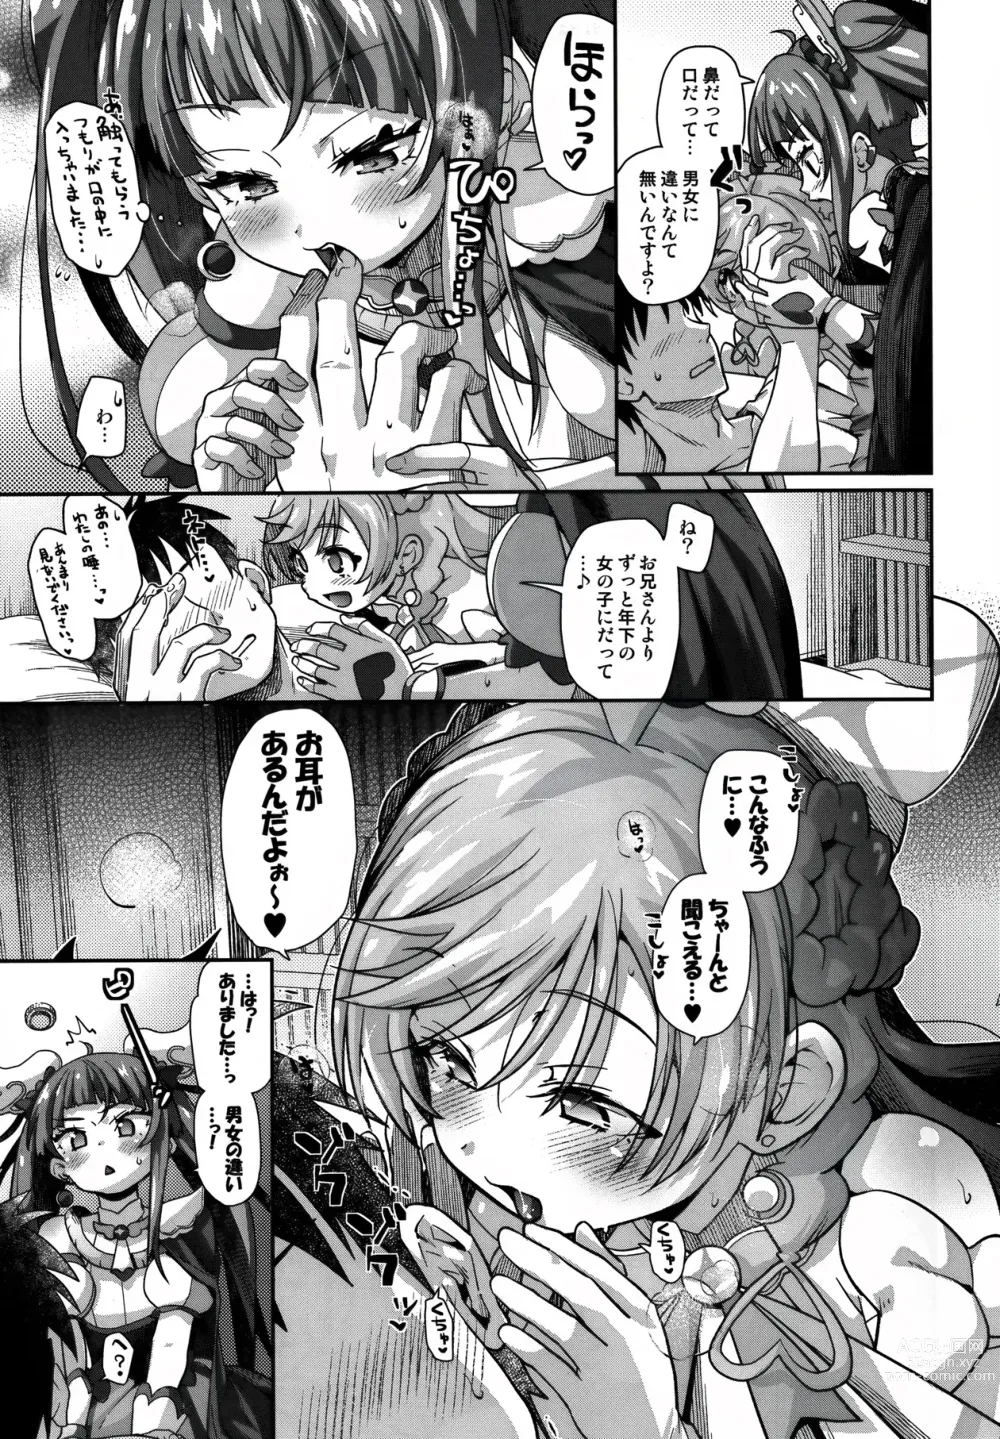 Page 7 of doujinshi Sora-chan IS THE LIMIT